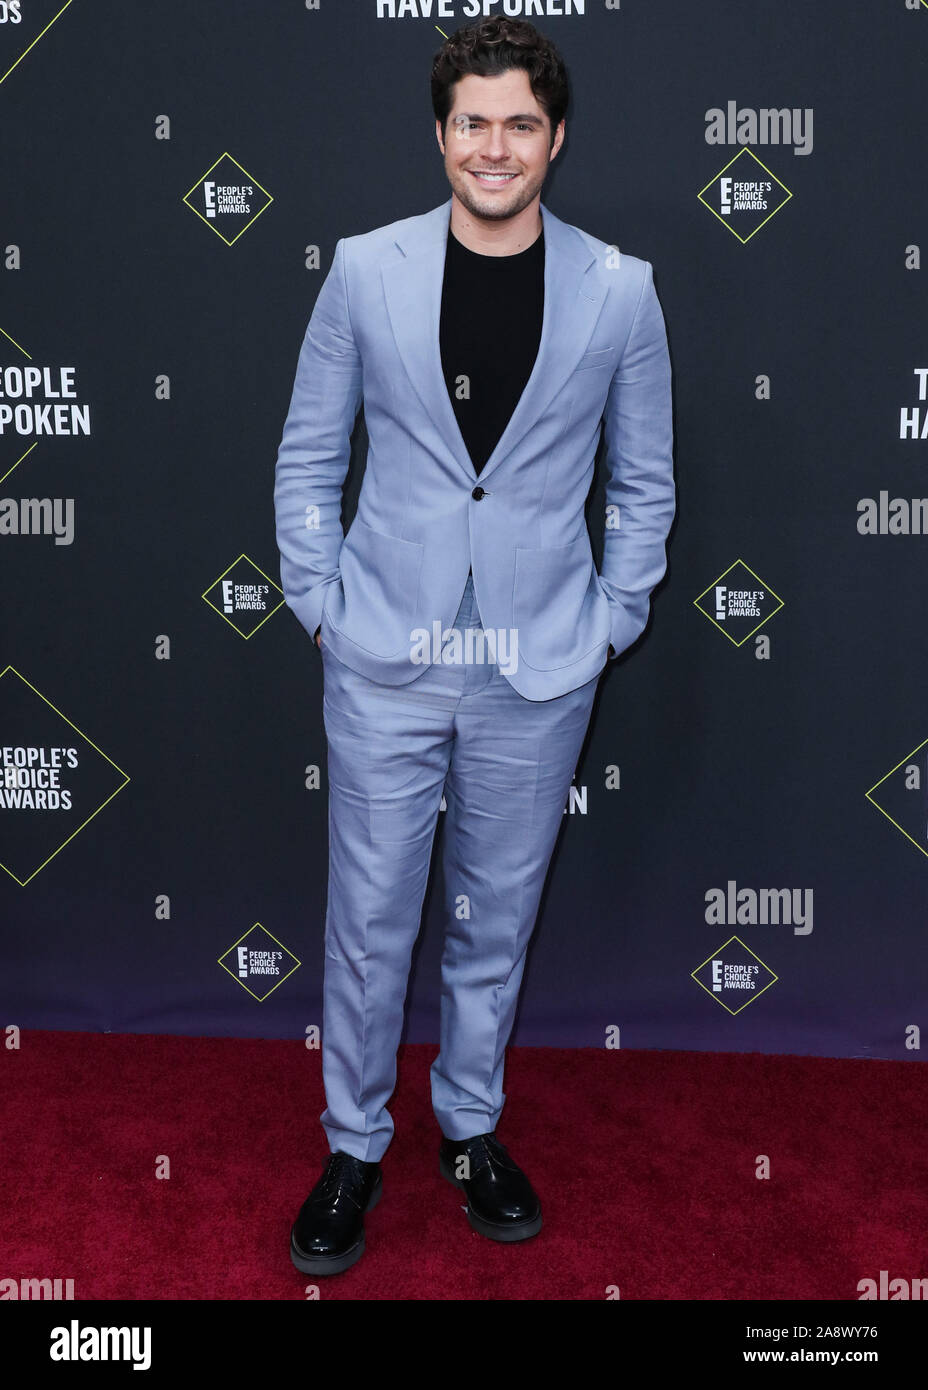 Ben Lewis arrives at the 2019 E! People's Choice Awards held at Barker ...